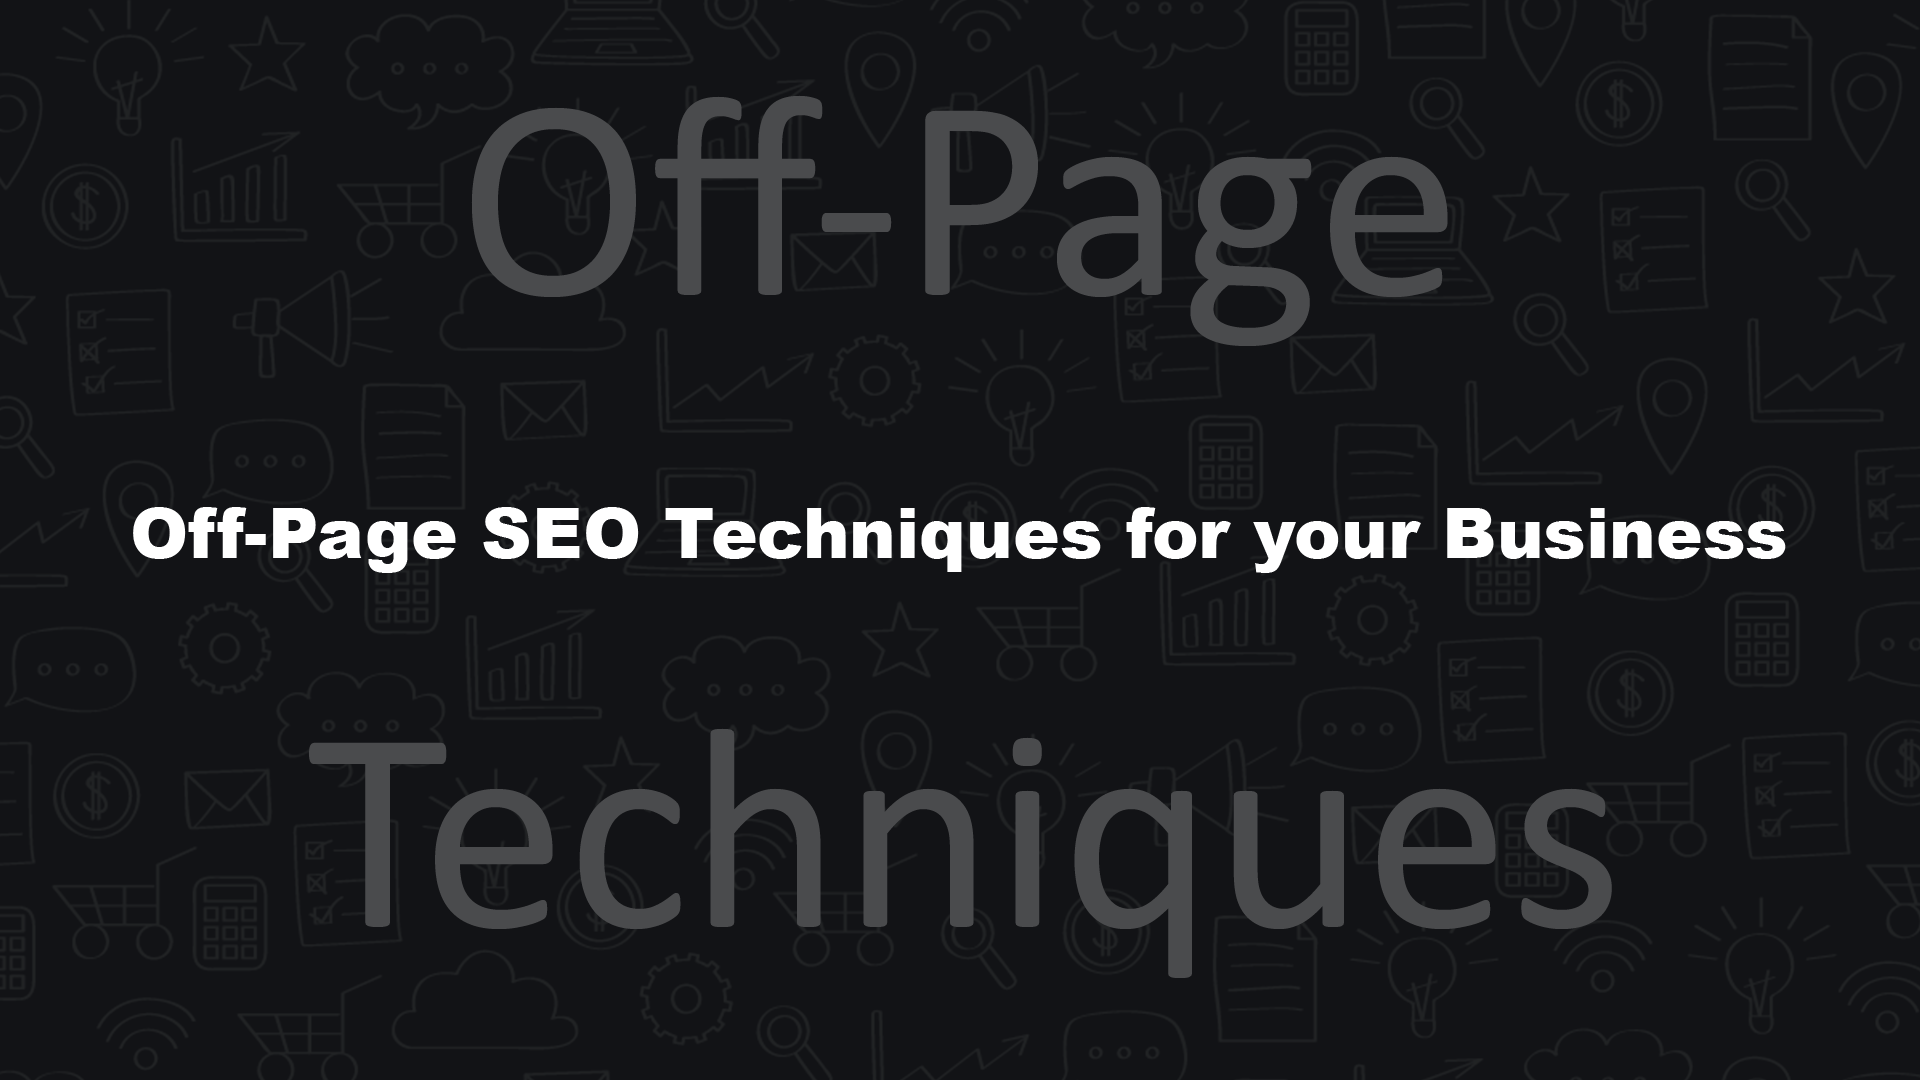 Off-Page SEO Techniques for your Business